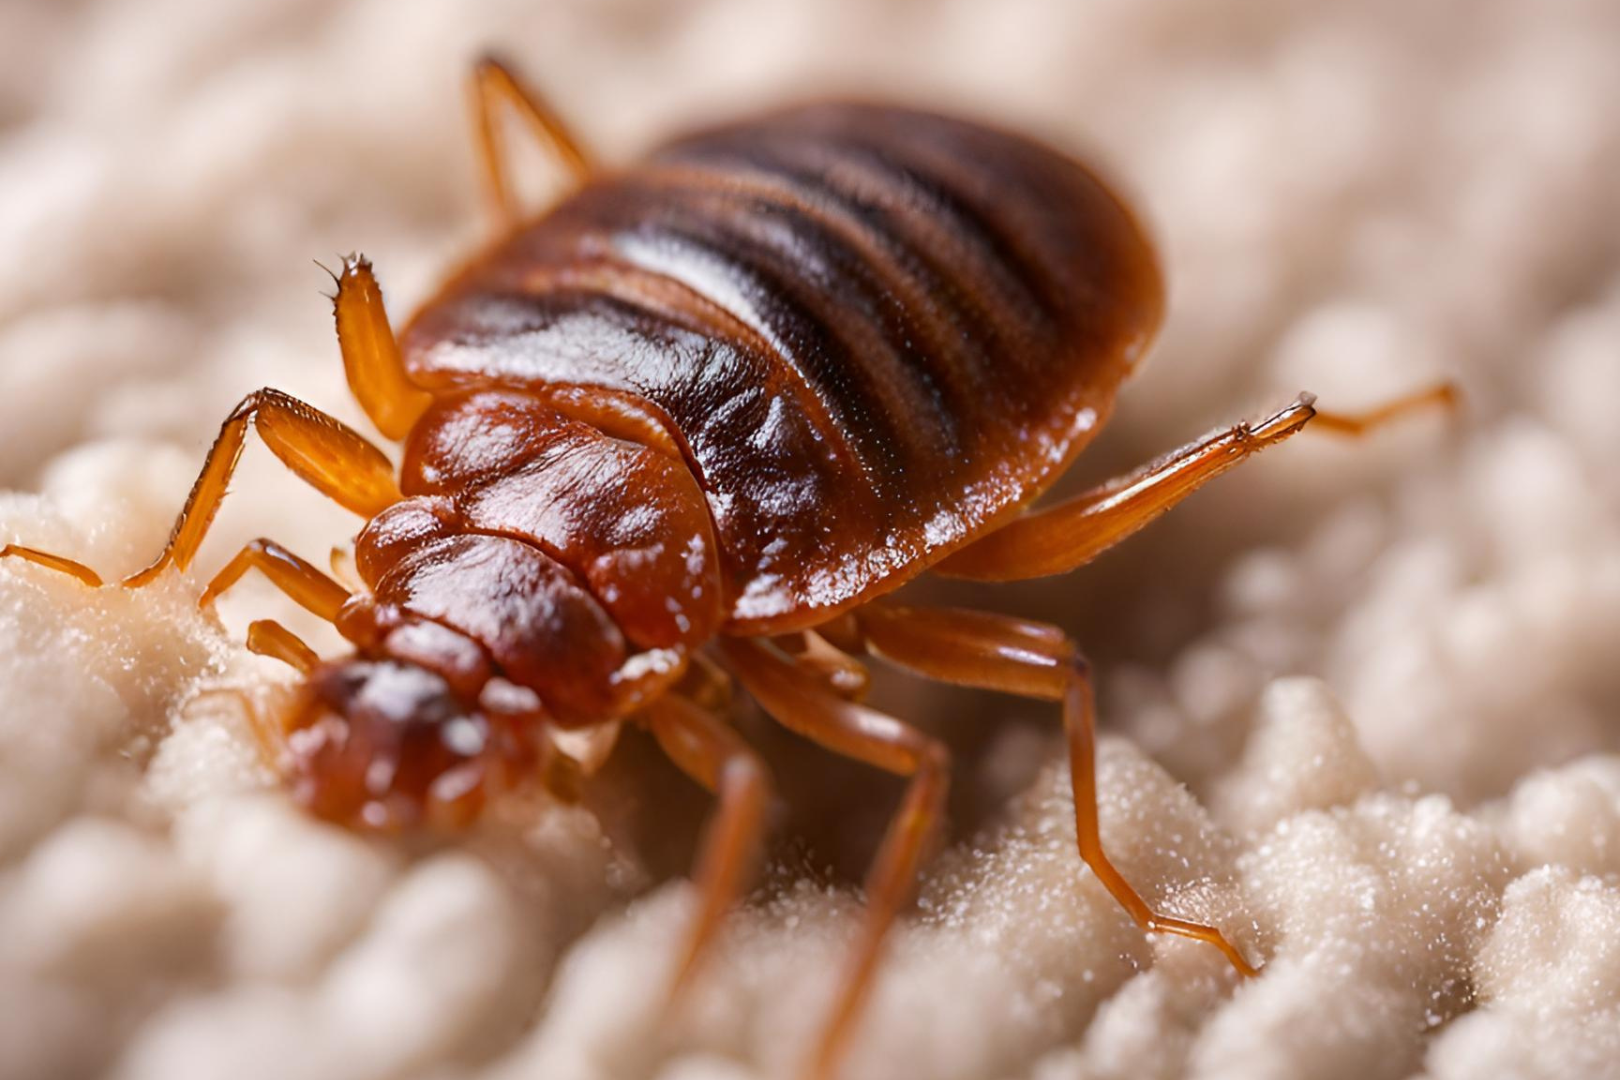 Adult bed bugs are visible to the naked eye